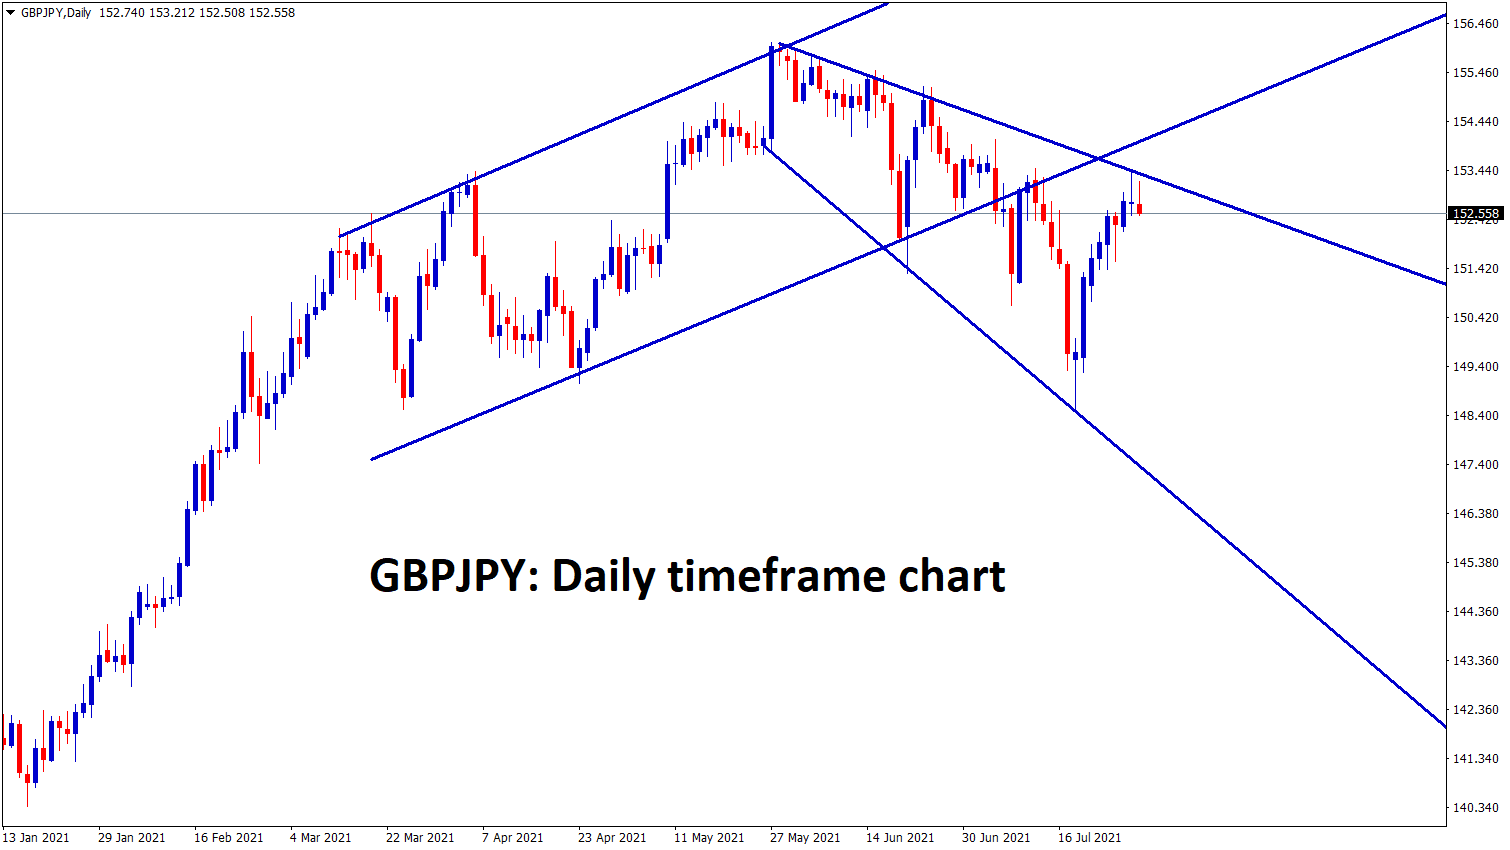 GBPJPY is ranging at the lower high zone of the downtrend line and expanding triangle pattern